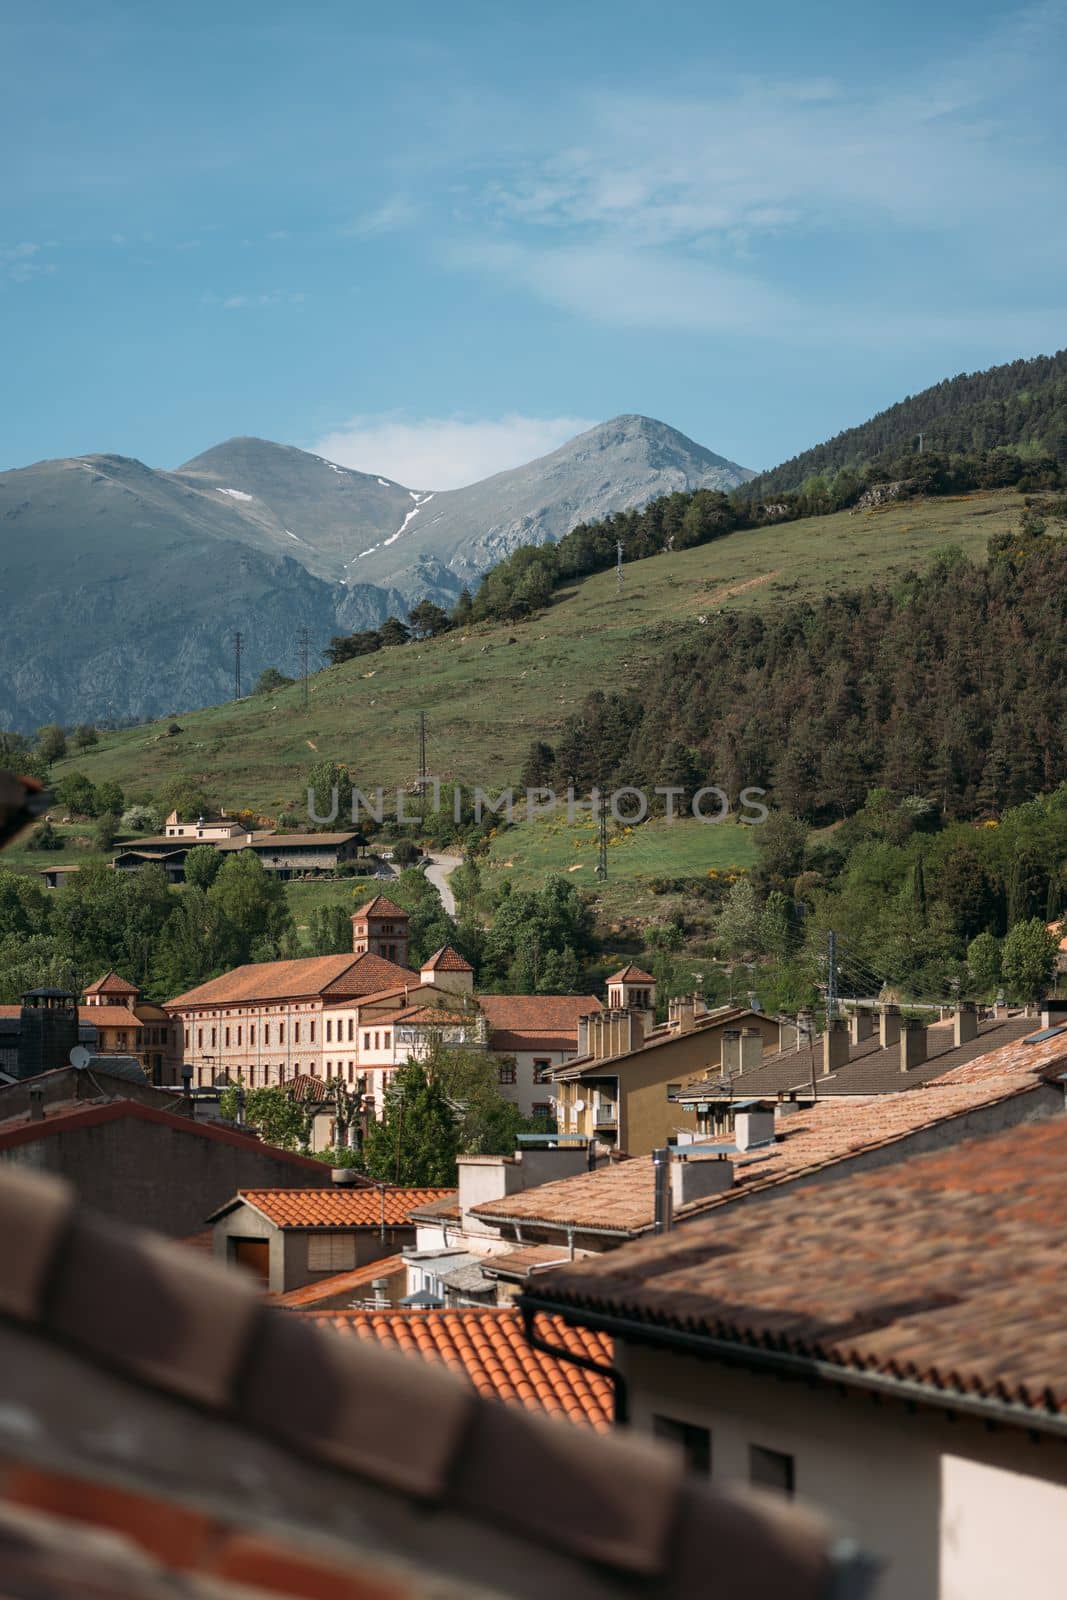 Orange roofs of modern houses in small village of Ribes de Freser at foot of Pyrenees in Spain. Sunlight illuminates beautiful village with picturesque mountain nature and beautiful architecture